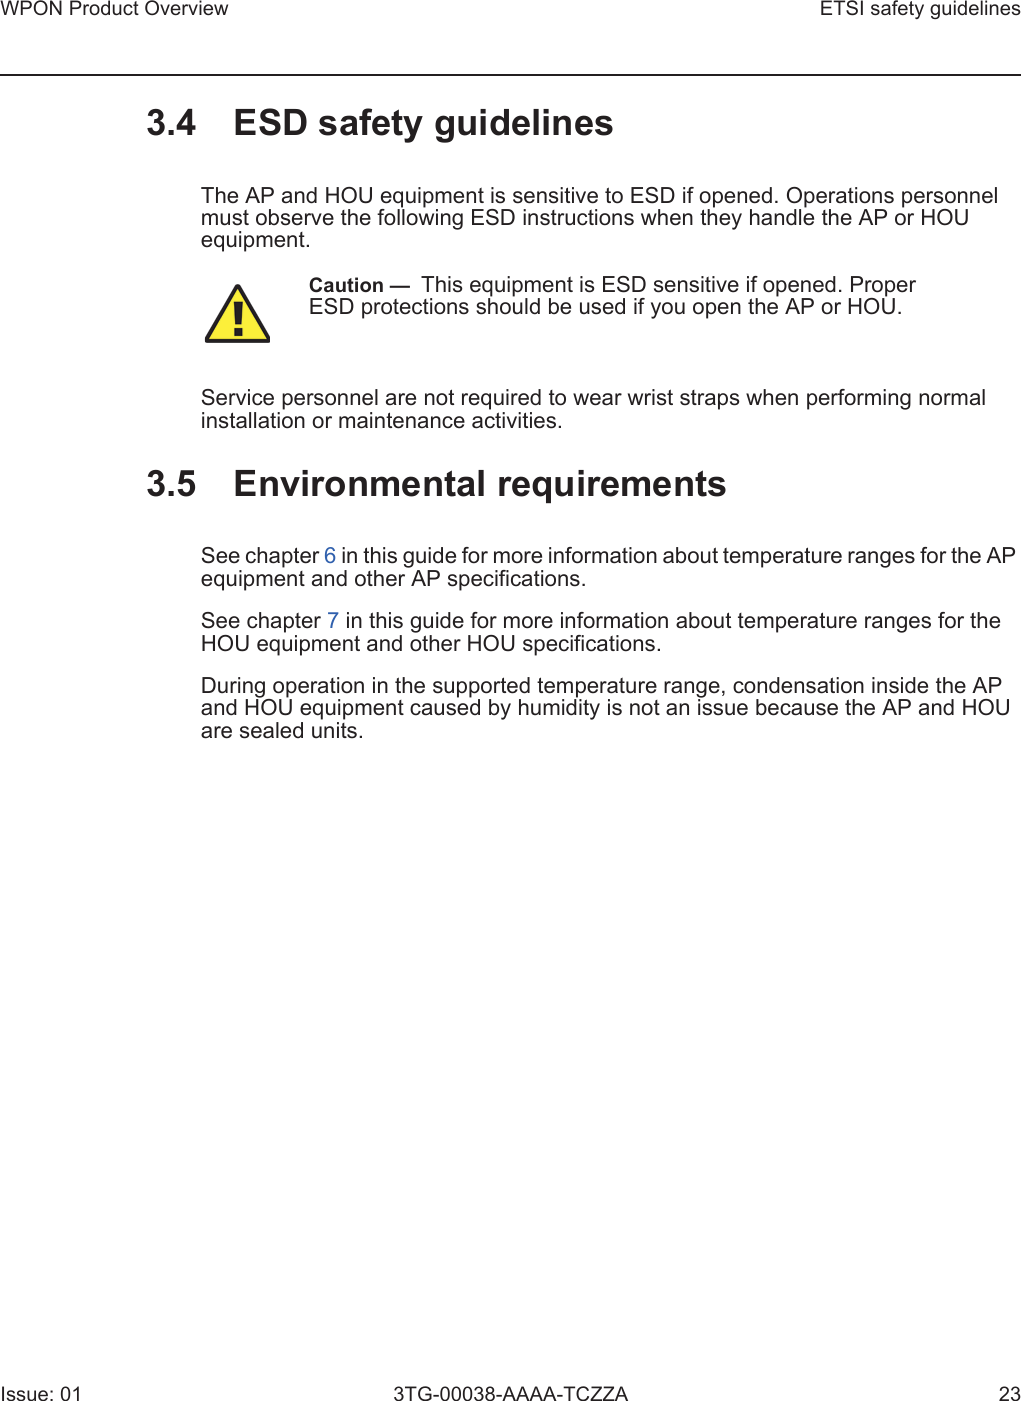 WPON Product Overview ETSI safety guidelinesIssue: 01 3TG-00038-AAAA-TCZZA 233.4 ESD safety guidelinesThe AP and HOU equipment is sensitive to ESD if opened. Operations personnel must observe the following ESD instructions when they handle the AP or HOU equipment. Service personnel are not required to wear wrist straps when performing normal installation or maintenance activities.3.5 Environmental requirementsSee chapter 6 in this guide for more information about temperature ranges for the AP equipment and other AP specifications. See chapter 7 in this guide for more information about temperature ranges for the HOU equipment and other HOU specifications. During operation in the supported temperature range, condensation inside the AP and HOU equipment caused by humidity is not an issue because the AP and HOU are sealed units.Caution —  This equipment is ESD sensitive if opened. Proper ESD protections should be used if you open the AP or HOU.